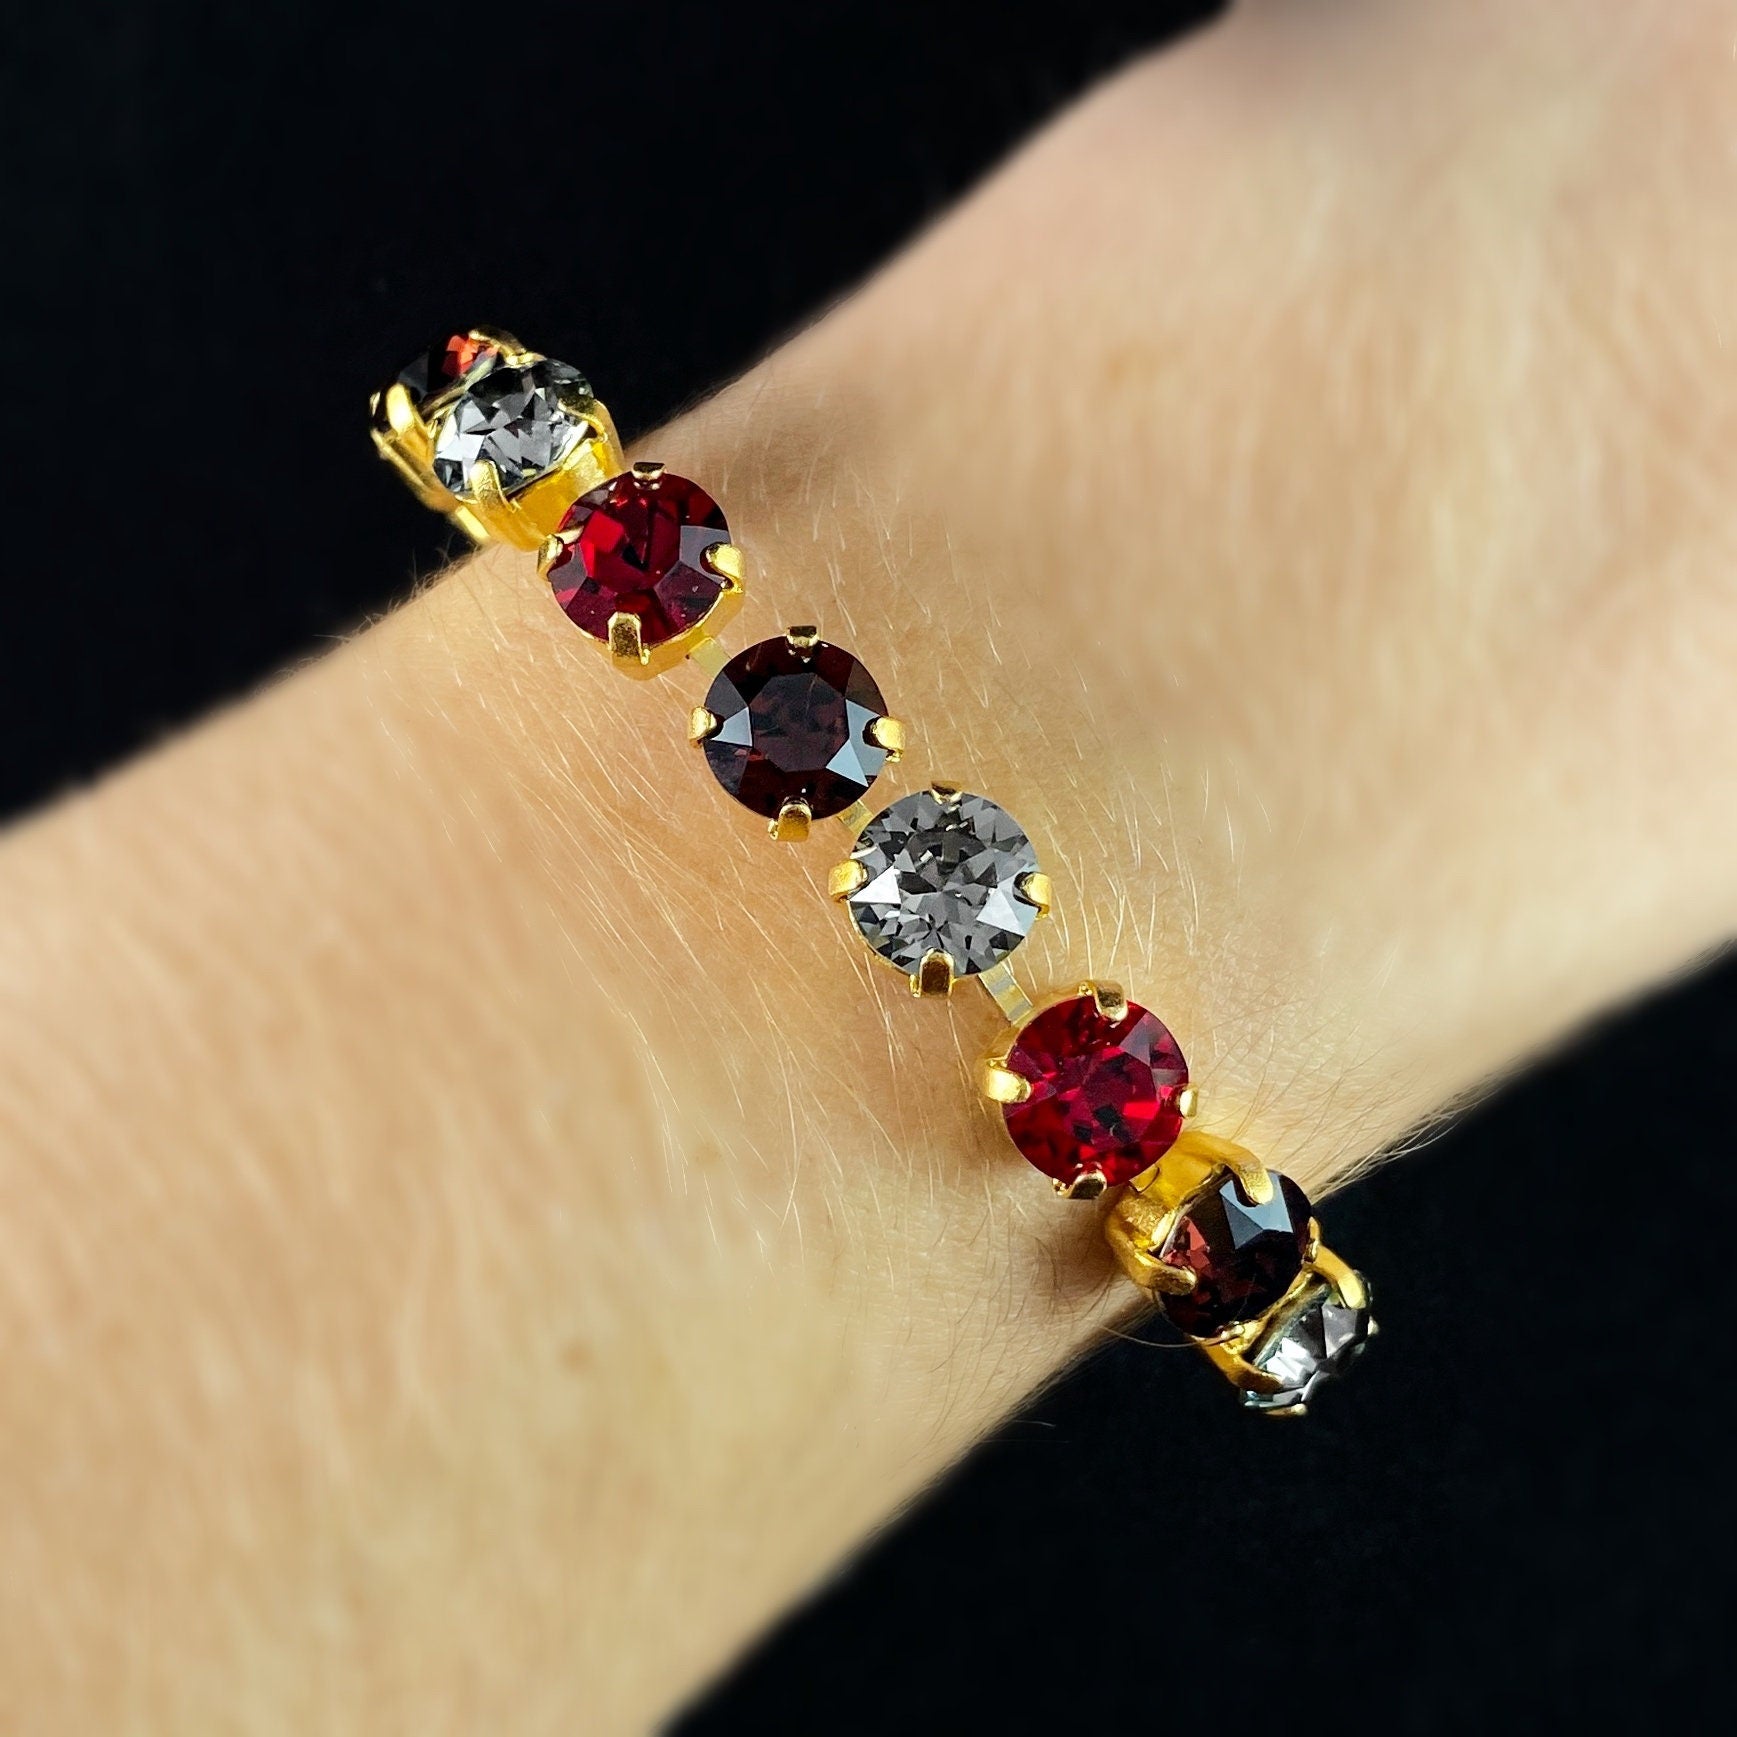 Multicolor Swarovski Crystal Bracelet with Red, Gray, and Purple Crystals - La Vie Parisienne by Catherine Popesco